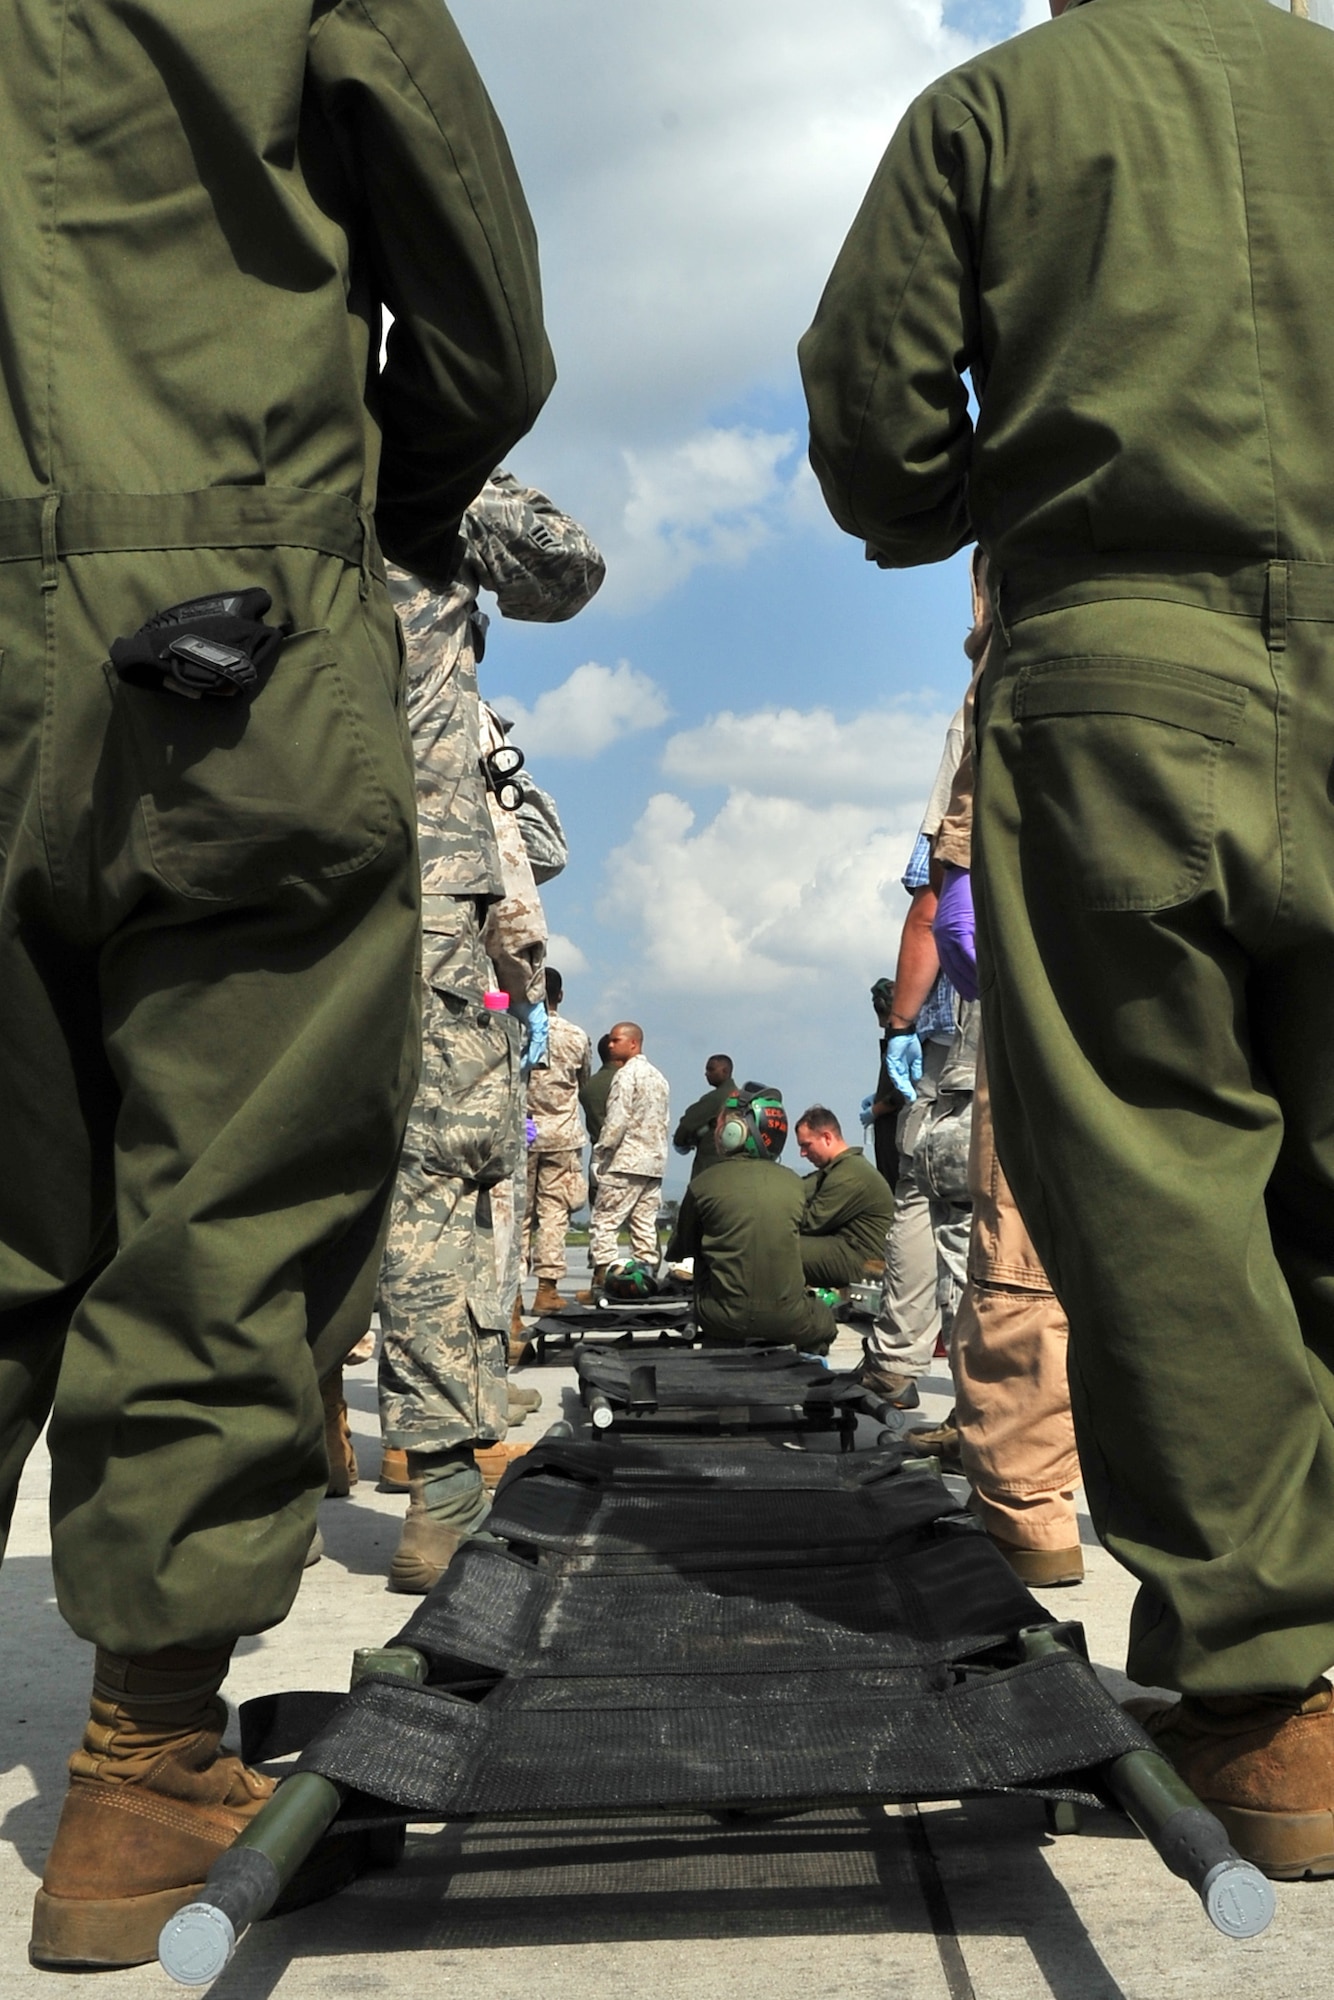 U.S. Marines and Airmen standby with litters to transport earthquake victims at the Tribhuvan International Airport in Kathmandu, Nepal, May 12, 2015. Joint Task Force-505 members worked with the Nepalese army to triage, treat and transport patients after a 7.3 magnitude earthquake struck the same day following a 7.8 magnitude quake that devastated the nation April 25, 2015. (U.S. Air Force photo by Staff Sgt. Melissa B. White/Released)